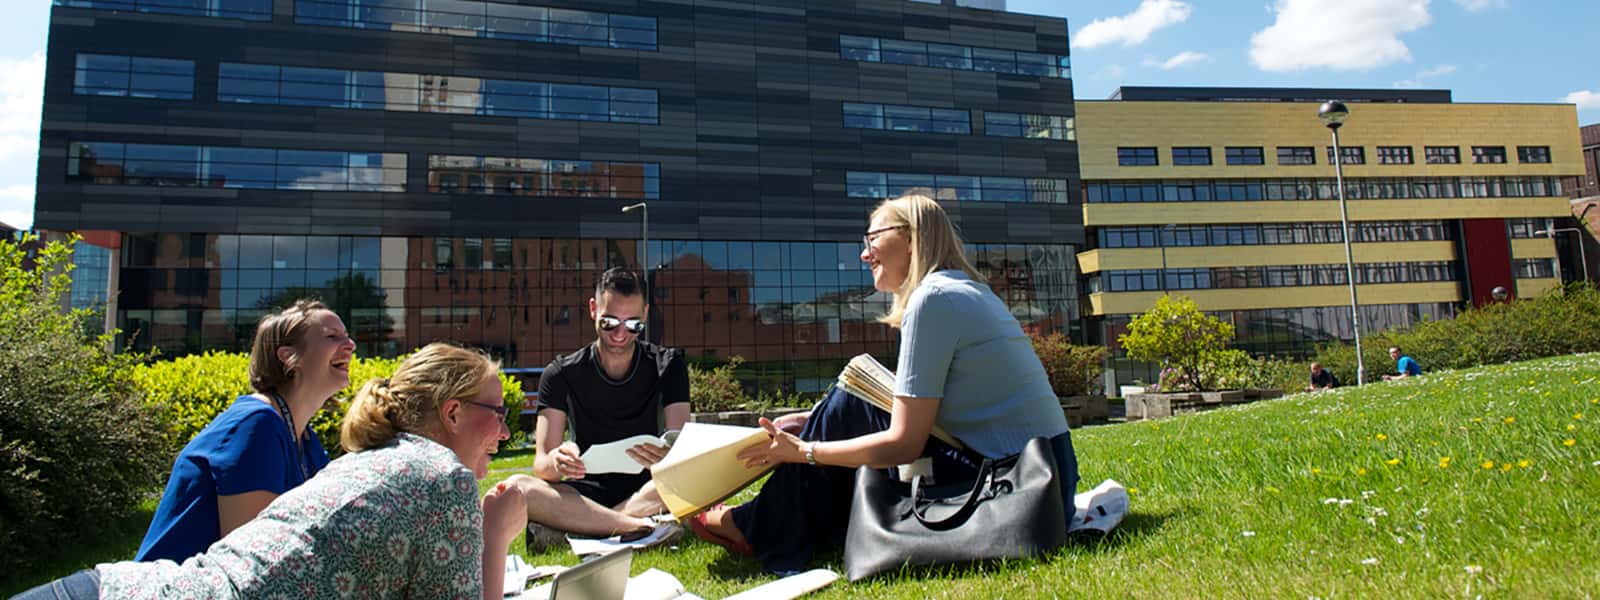 Four students sitting on the grass on campus